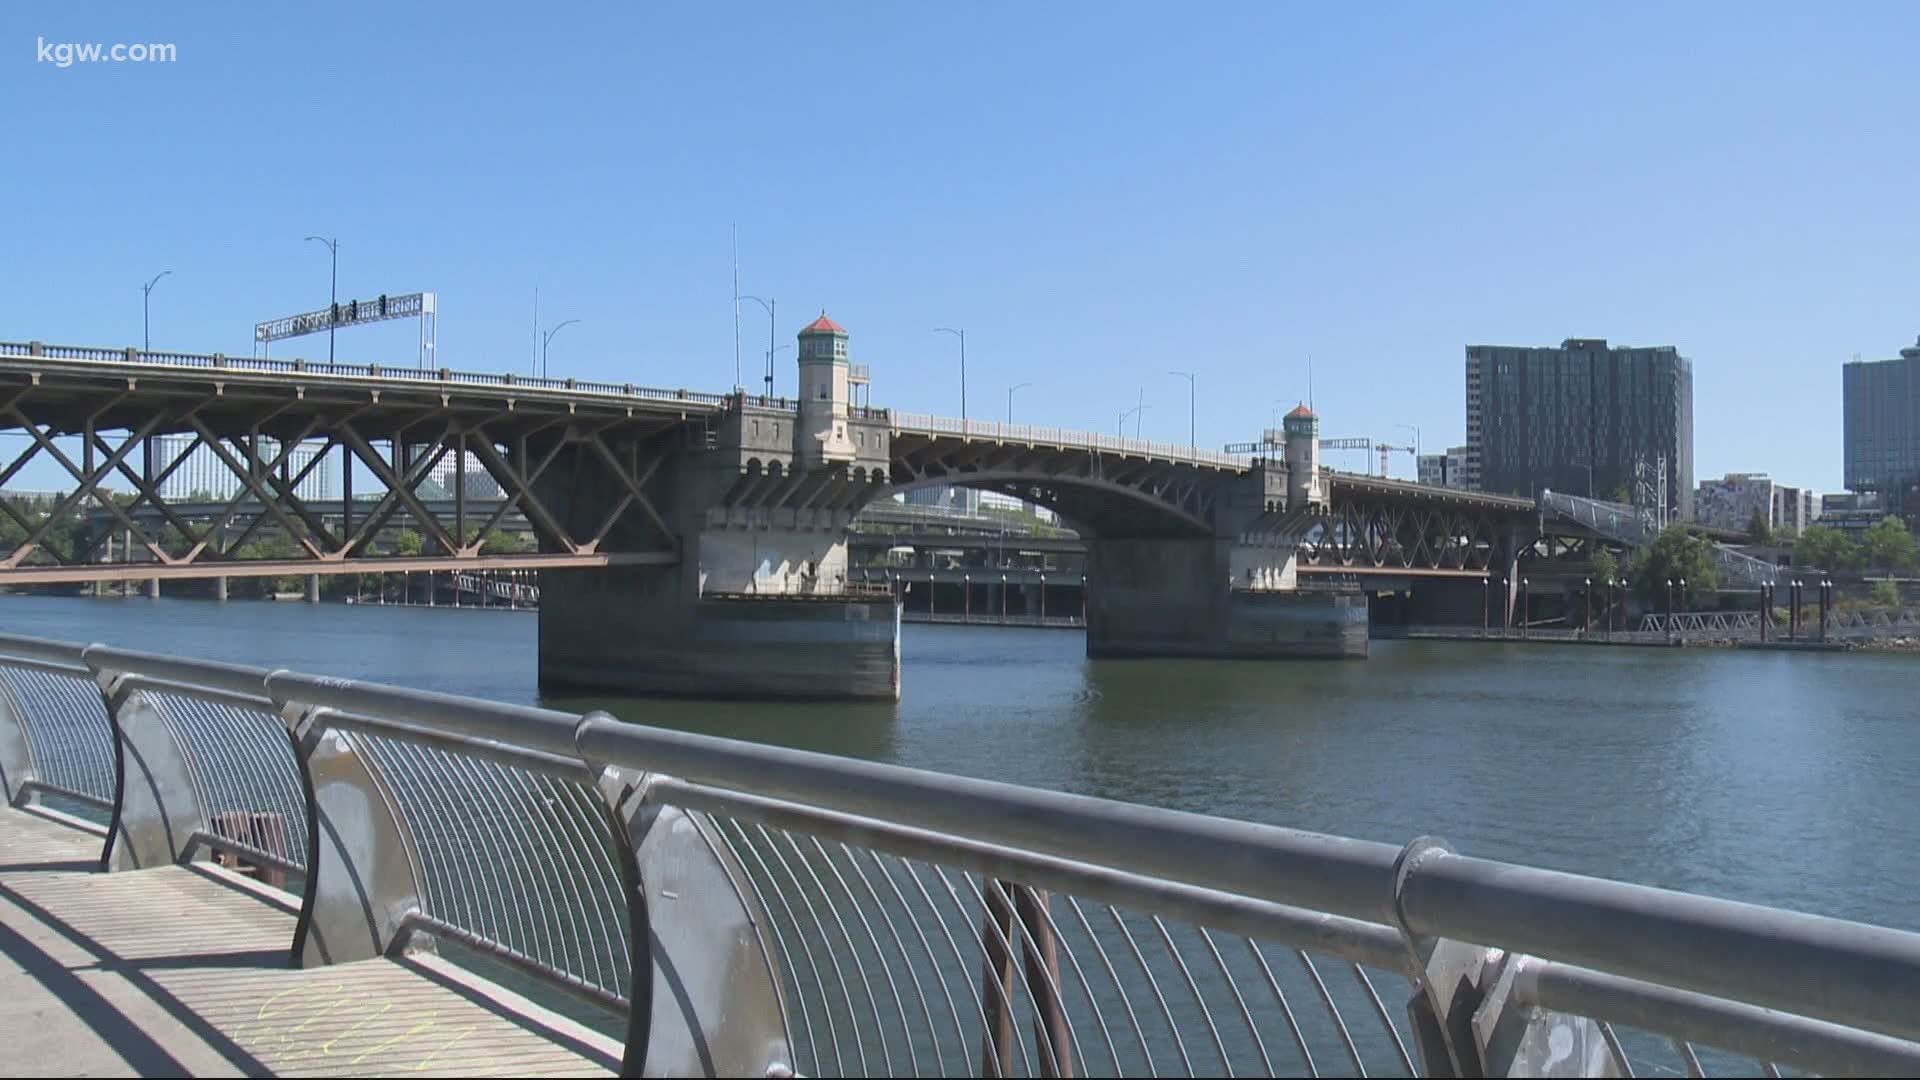 The design phase of the Burnside Bridge project starts in December. KGW traffic reporter Chris McGinness dug into some questions about the cost of the project.